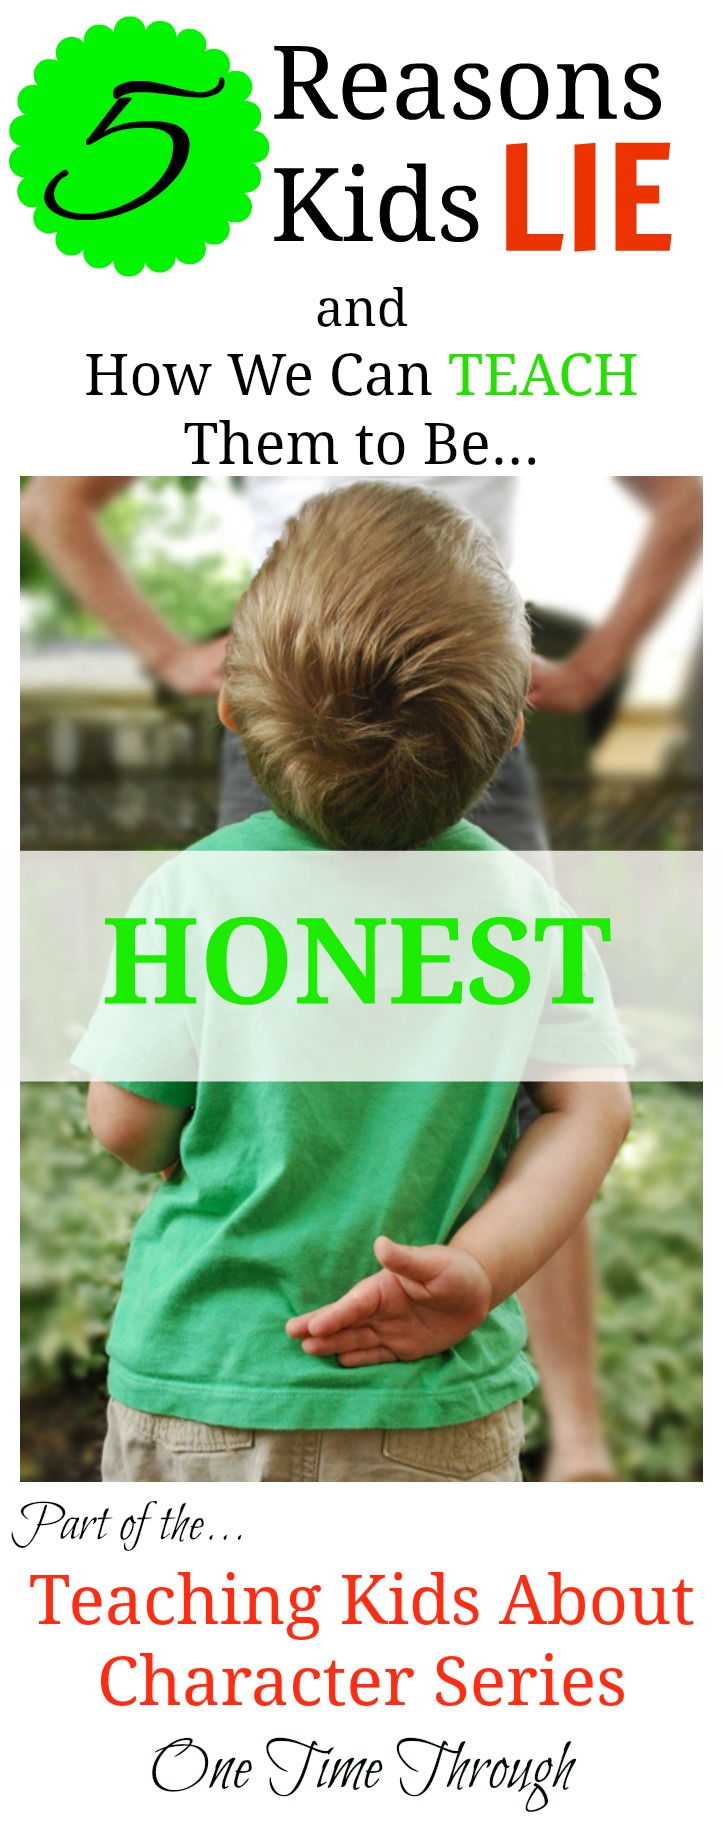 5 Reasons Kids Lie: How to Teach them to be Honest